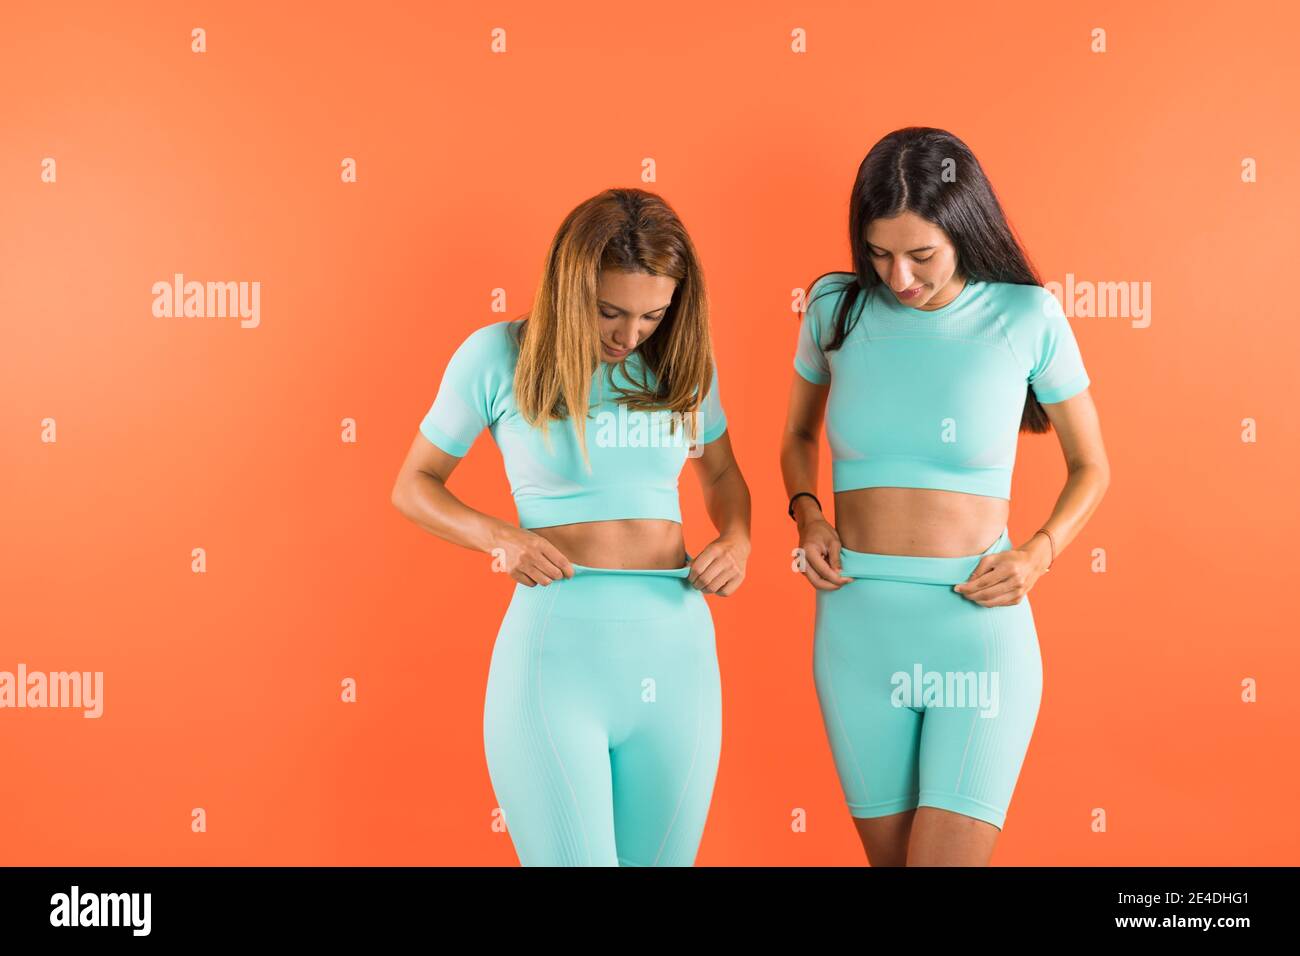 Young fit athletic women flexing their abs, wearing turquoise